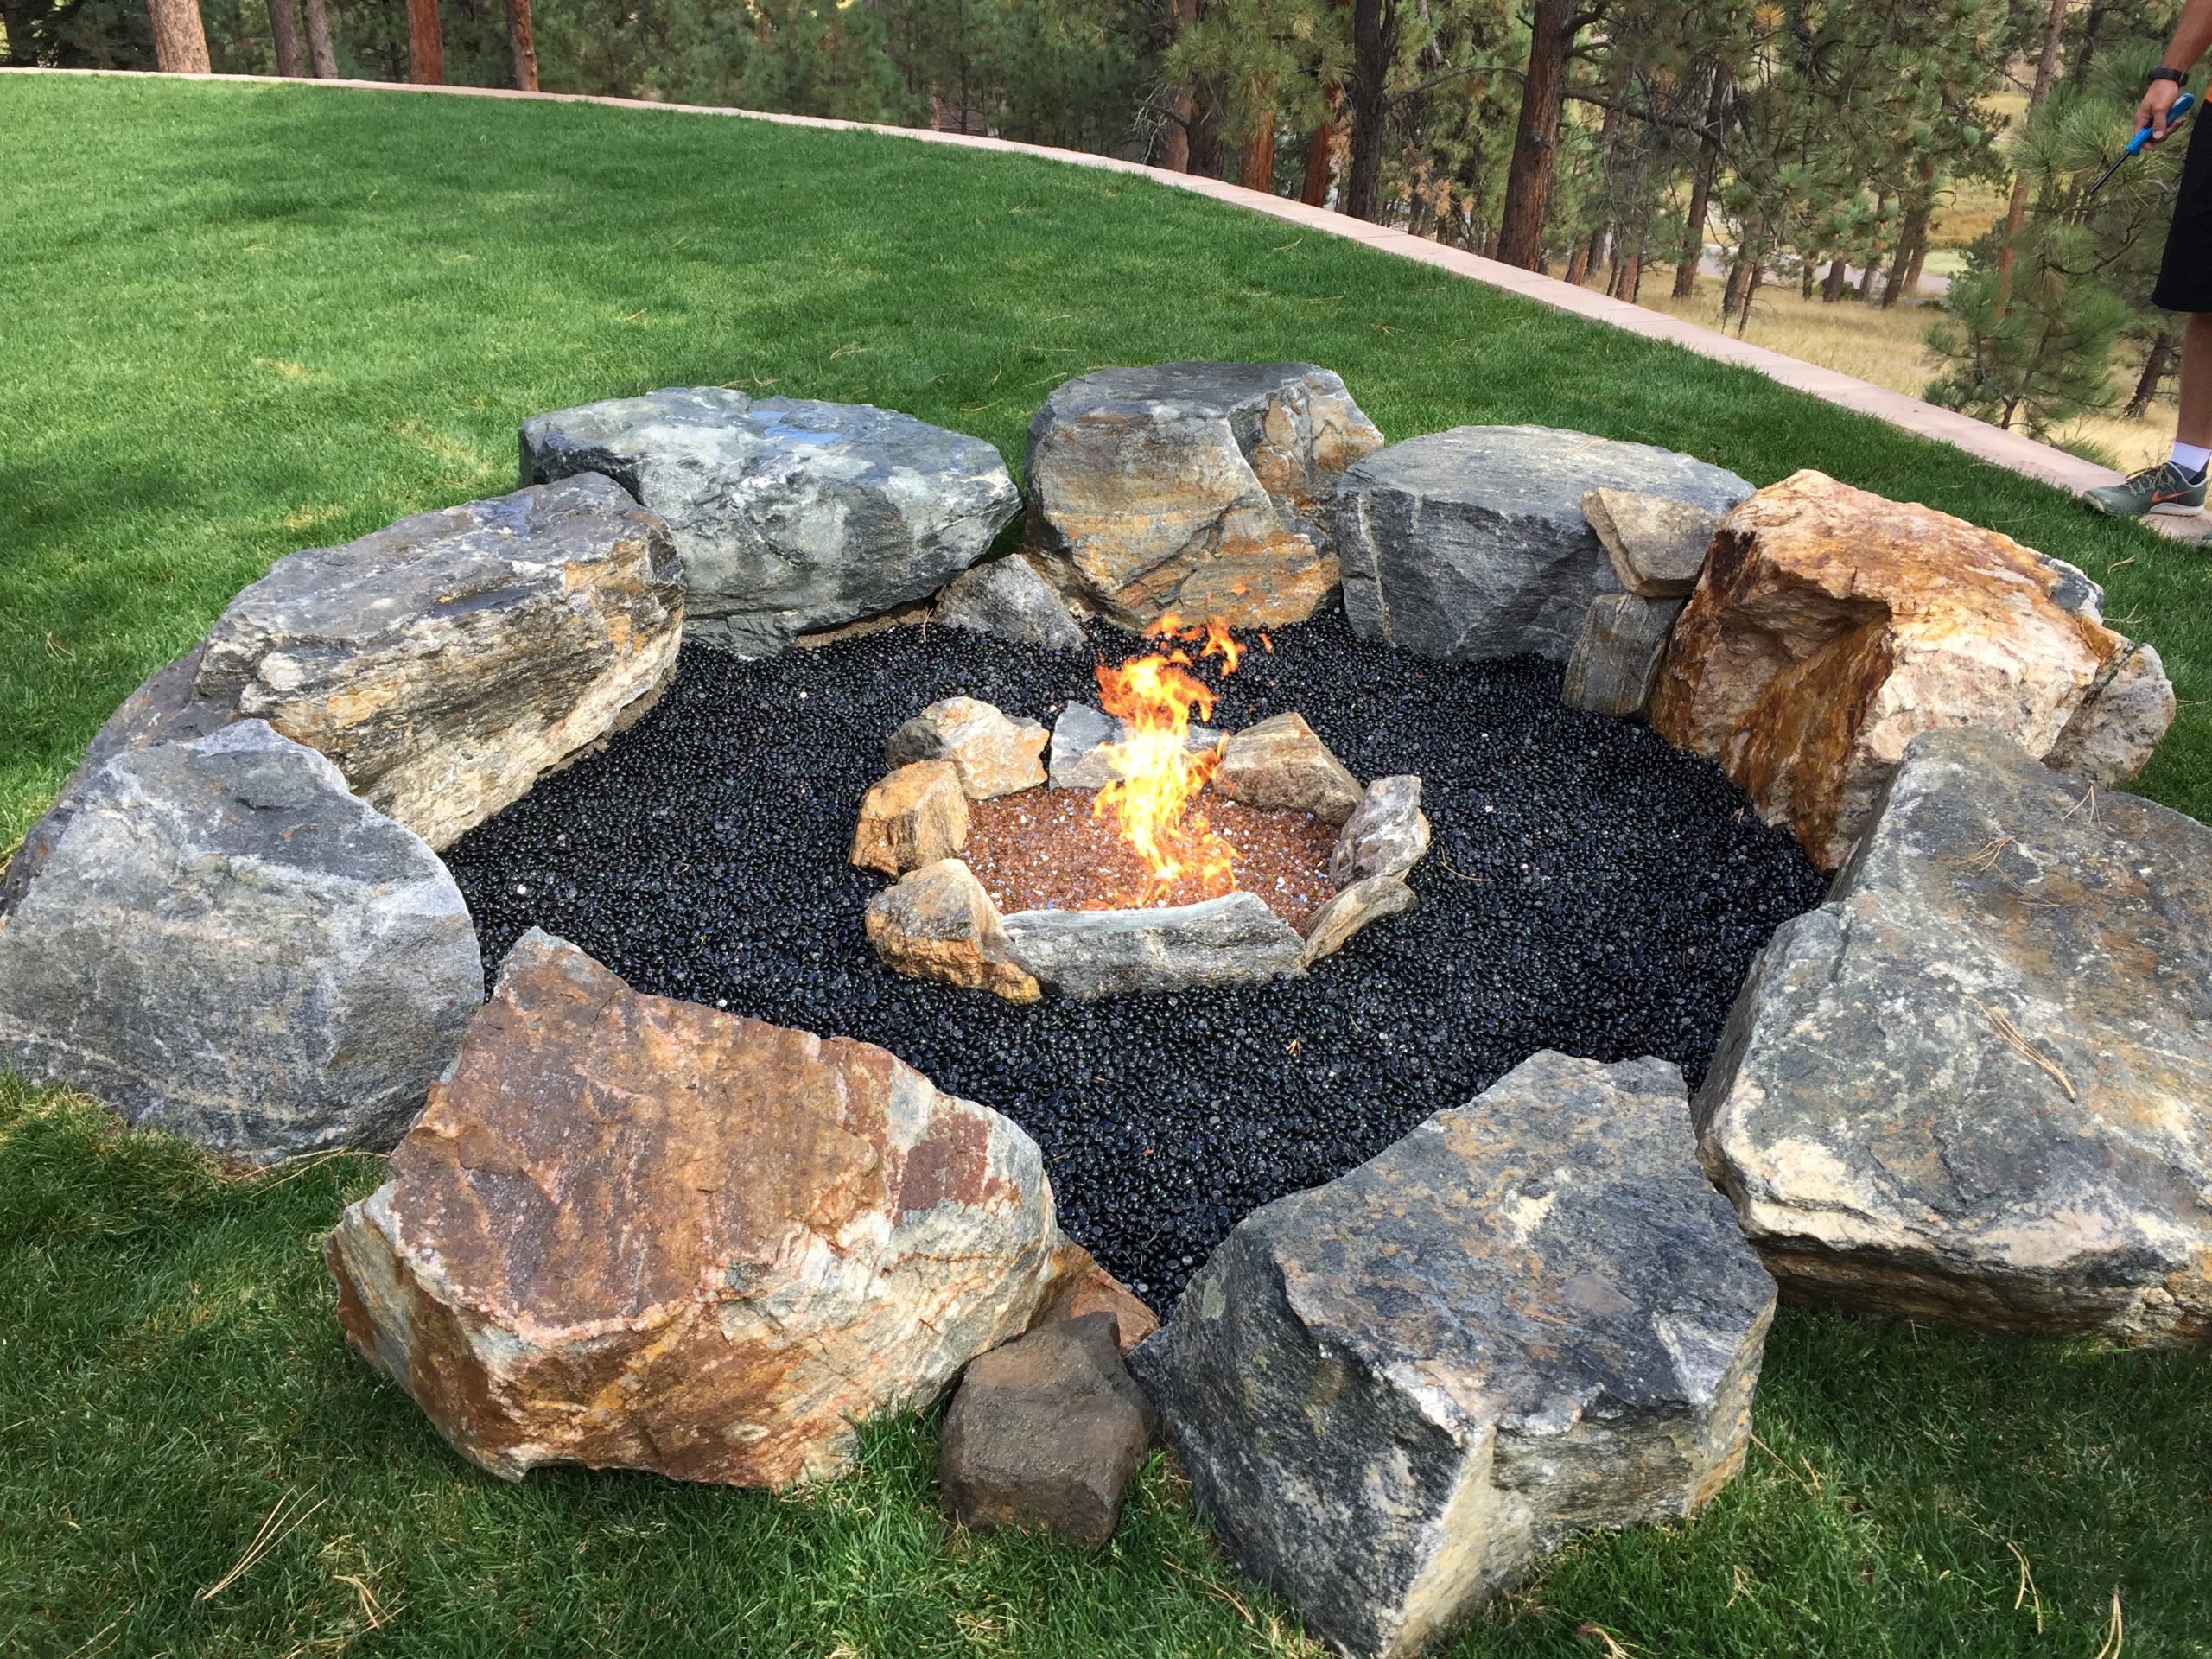 Lit fireplace surrounded by black gravel, with larger rocks beyond that for seating